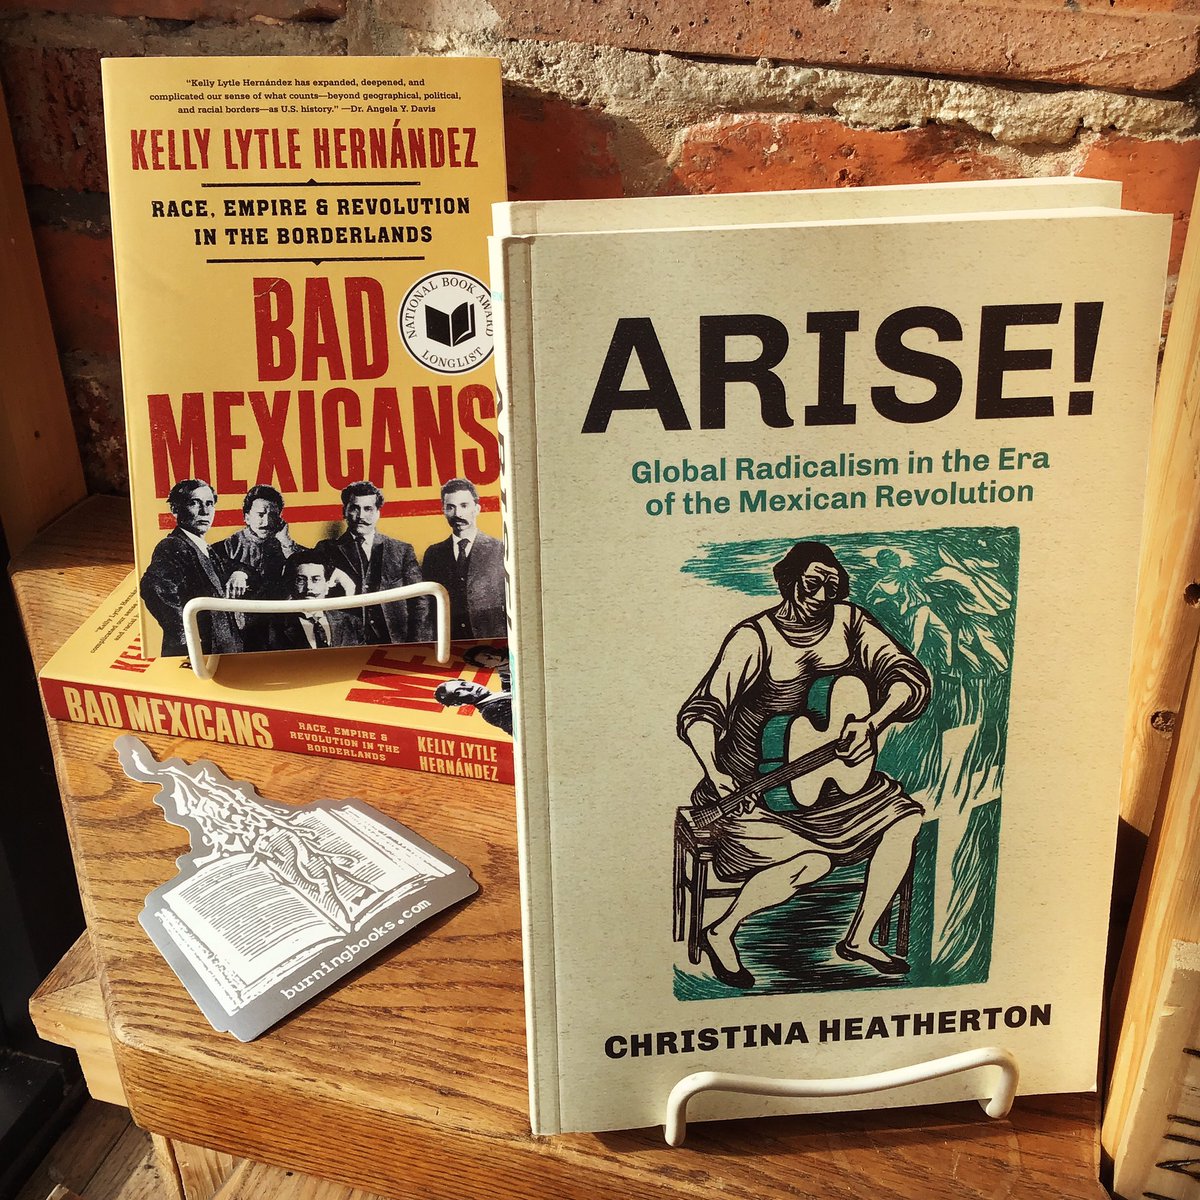 “Arise! is an international history of radical movements during the Mexican revolution, reconstructing how this era’s radical organizers found new ways to fight global capitalism & forge anti-racist internationalism from below.” burningbooks.com/products/arise… burningbooks.com/products/bad-m…